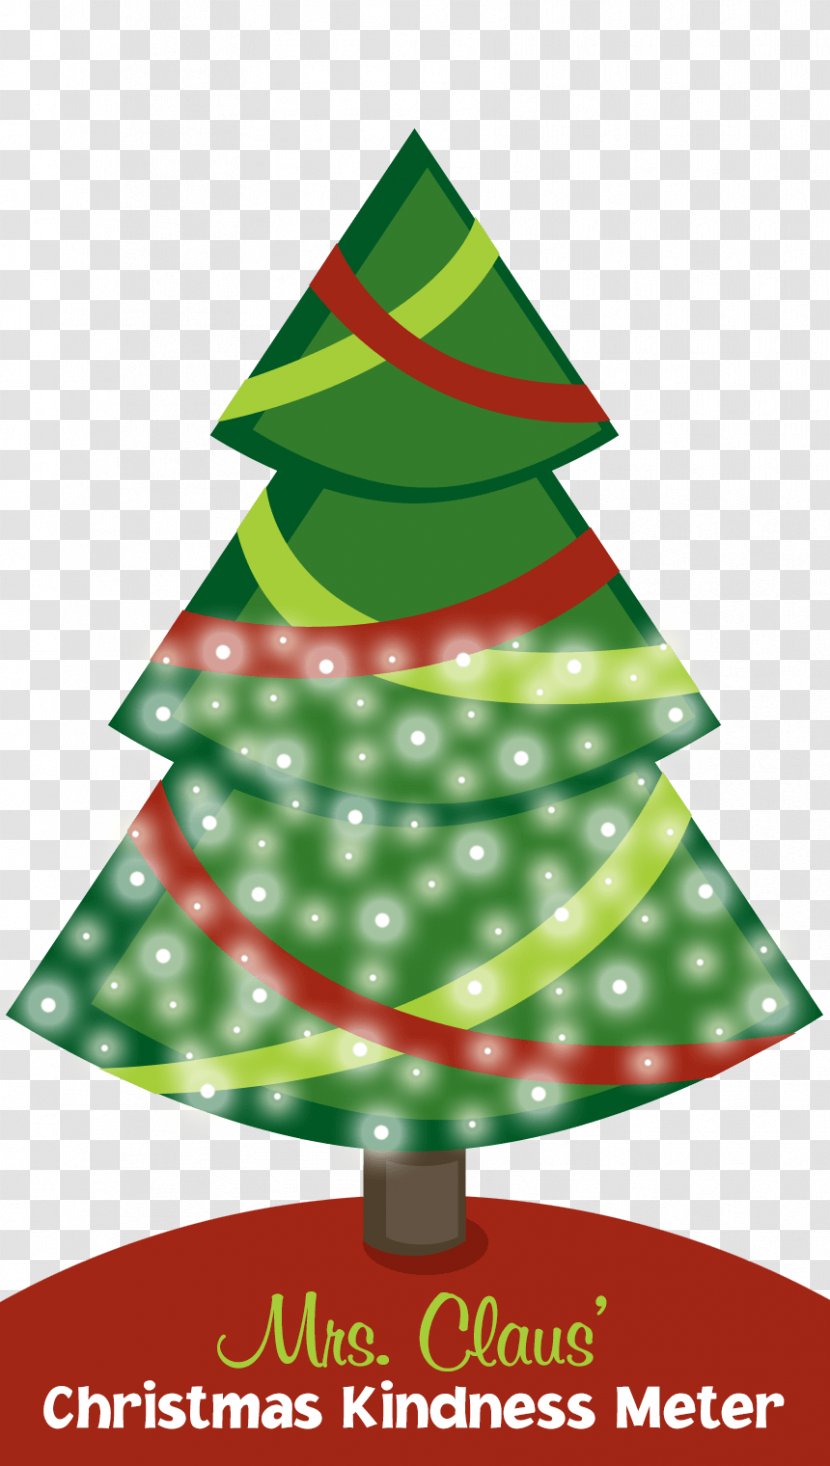 Christmas Tree Ornament Day Spruce Fir - Decor Transparent PNG